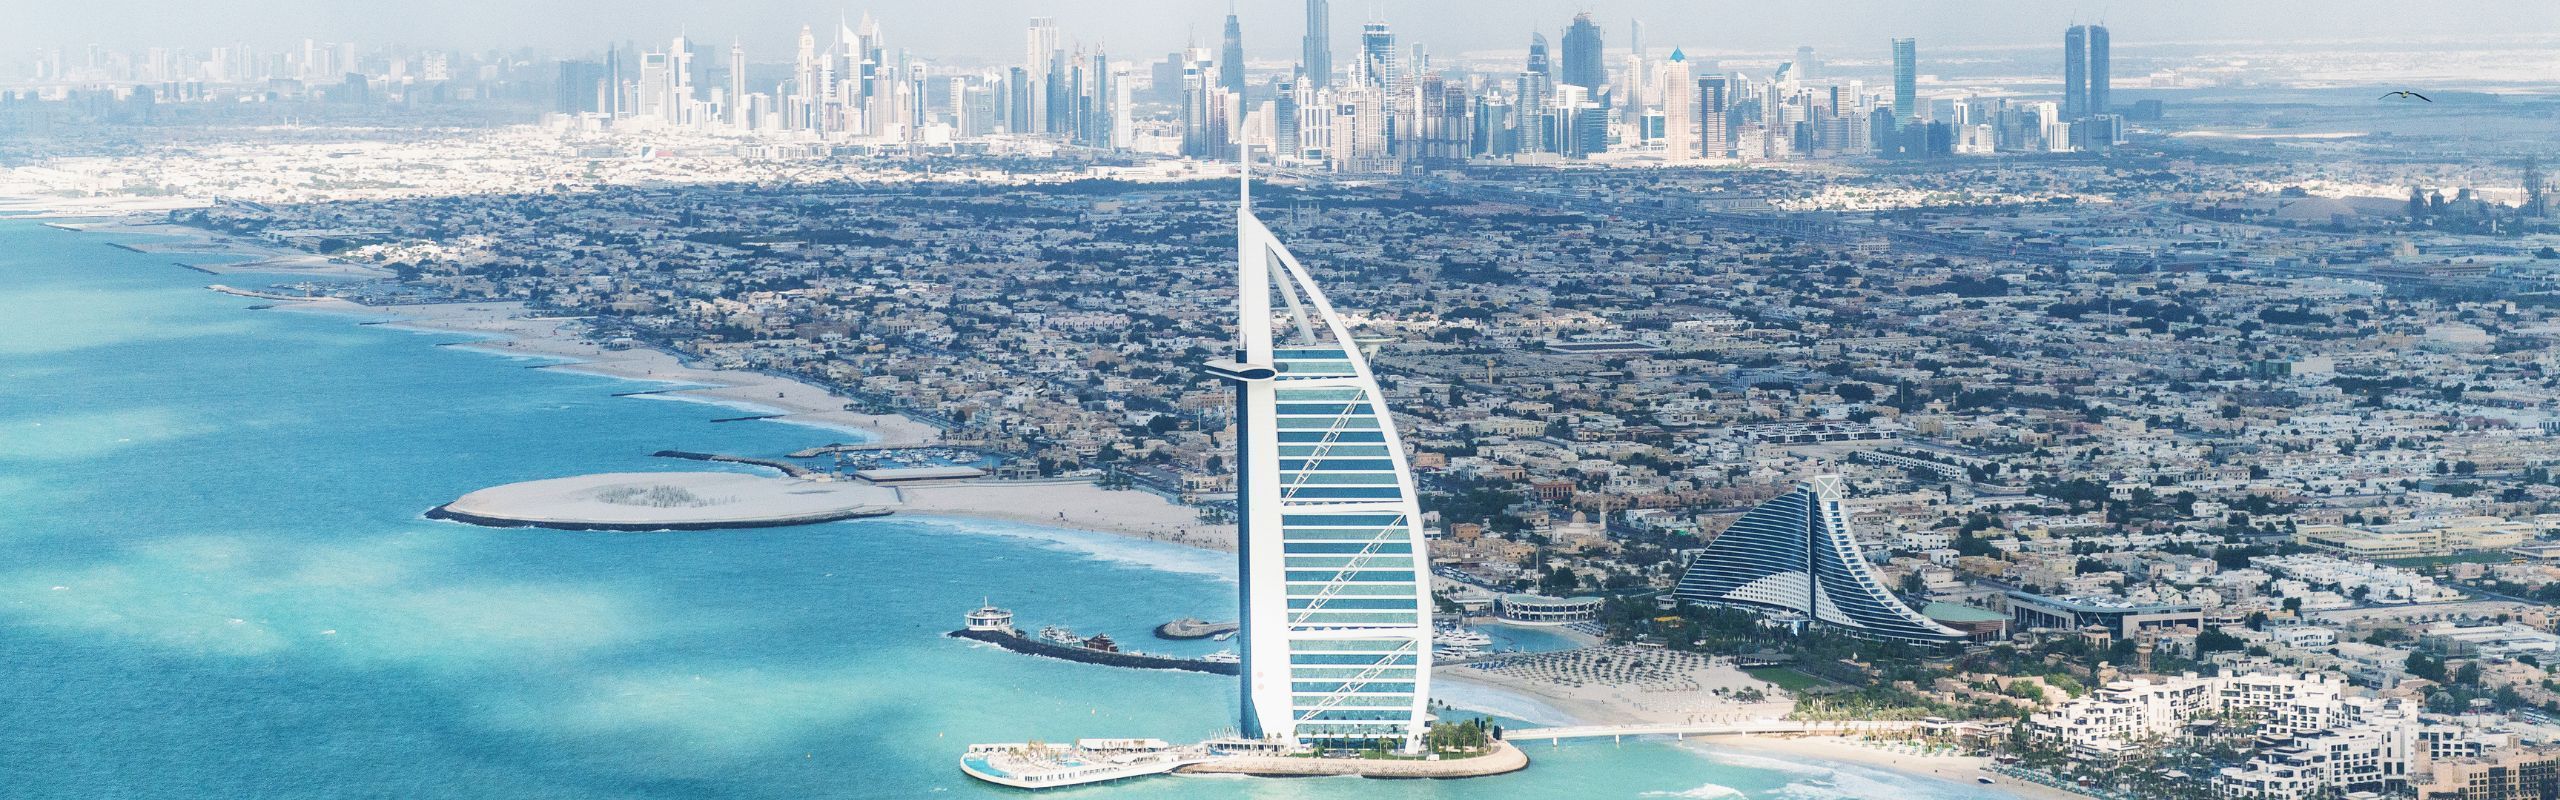 Image of an aerial view of Dubai next to the water